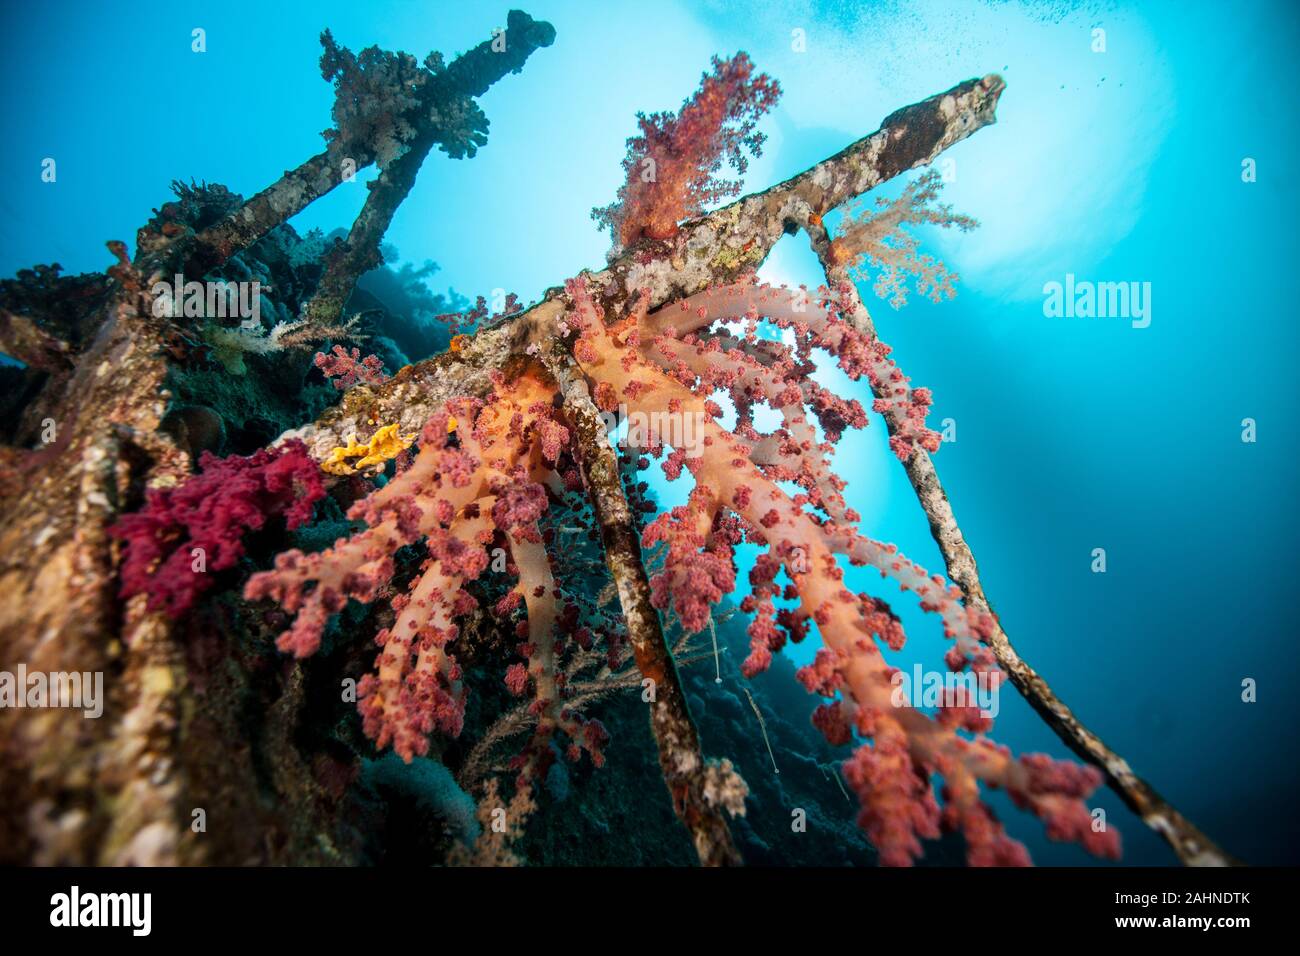 Dendronephthya hemprichi is a common soft coral found from Red Sea to Western Pacific Stock Photo